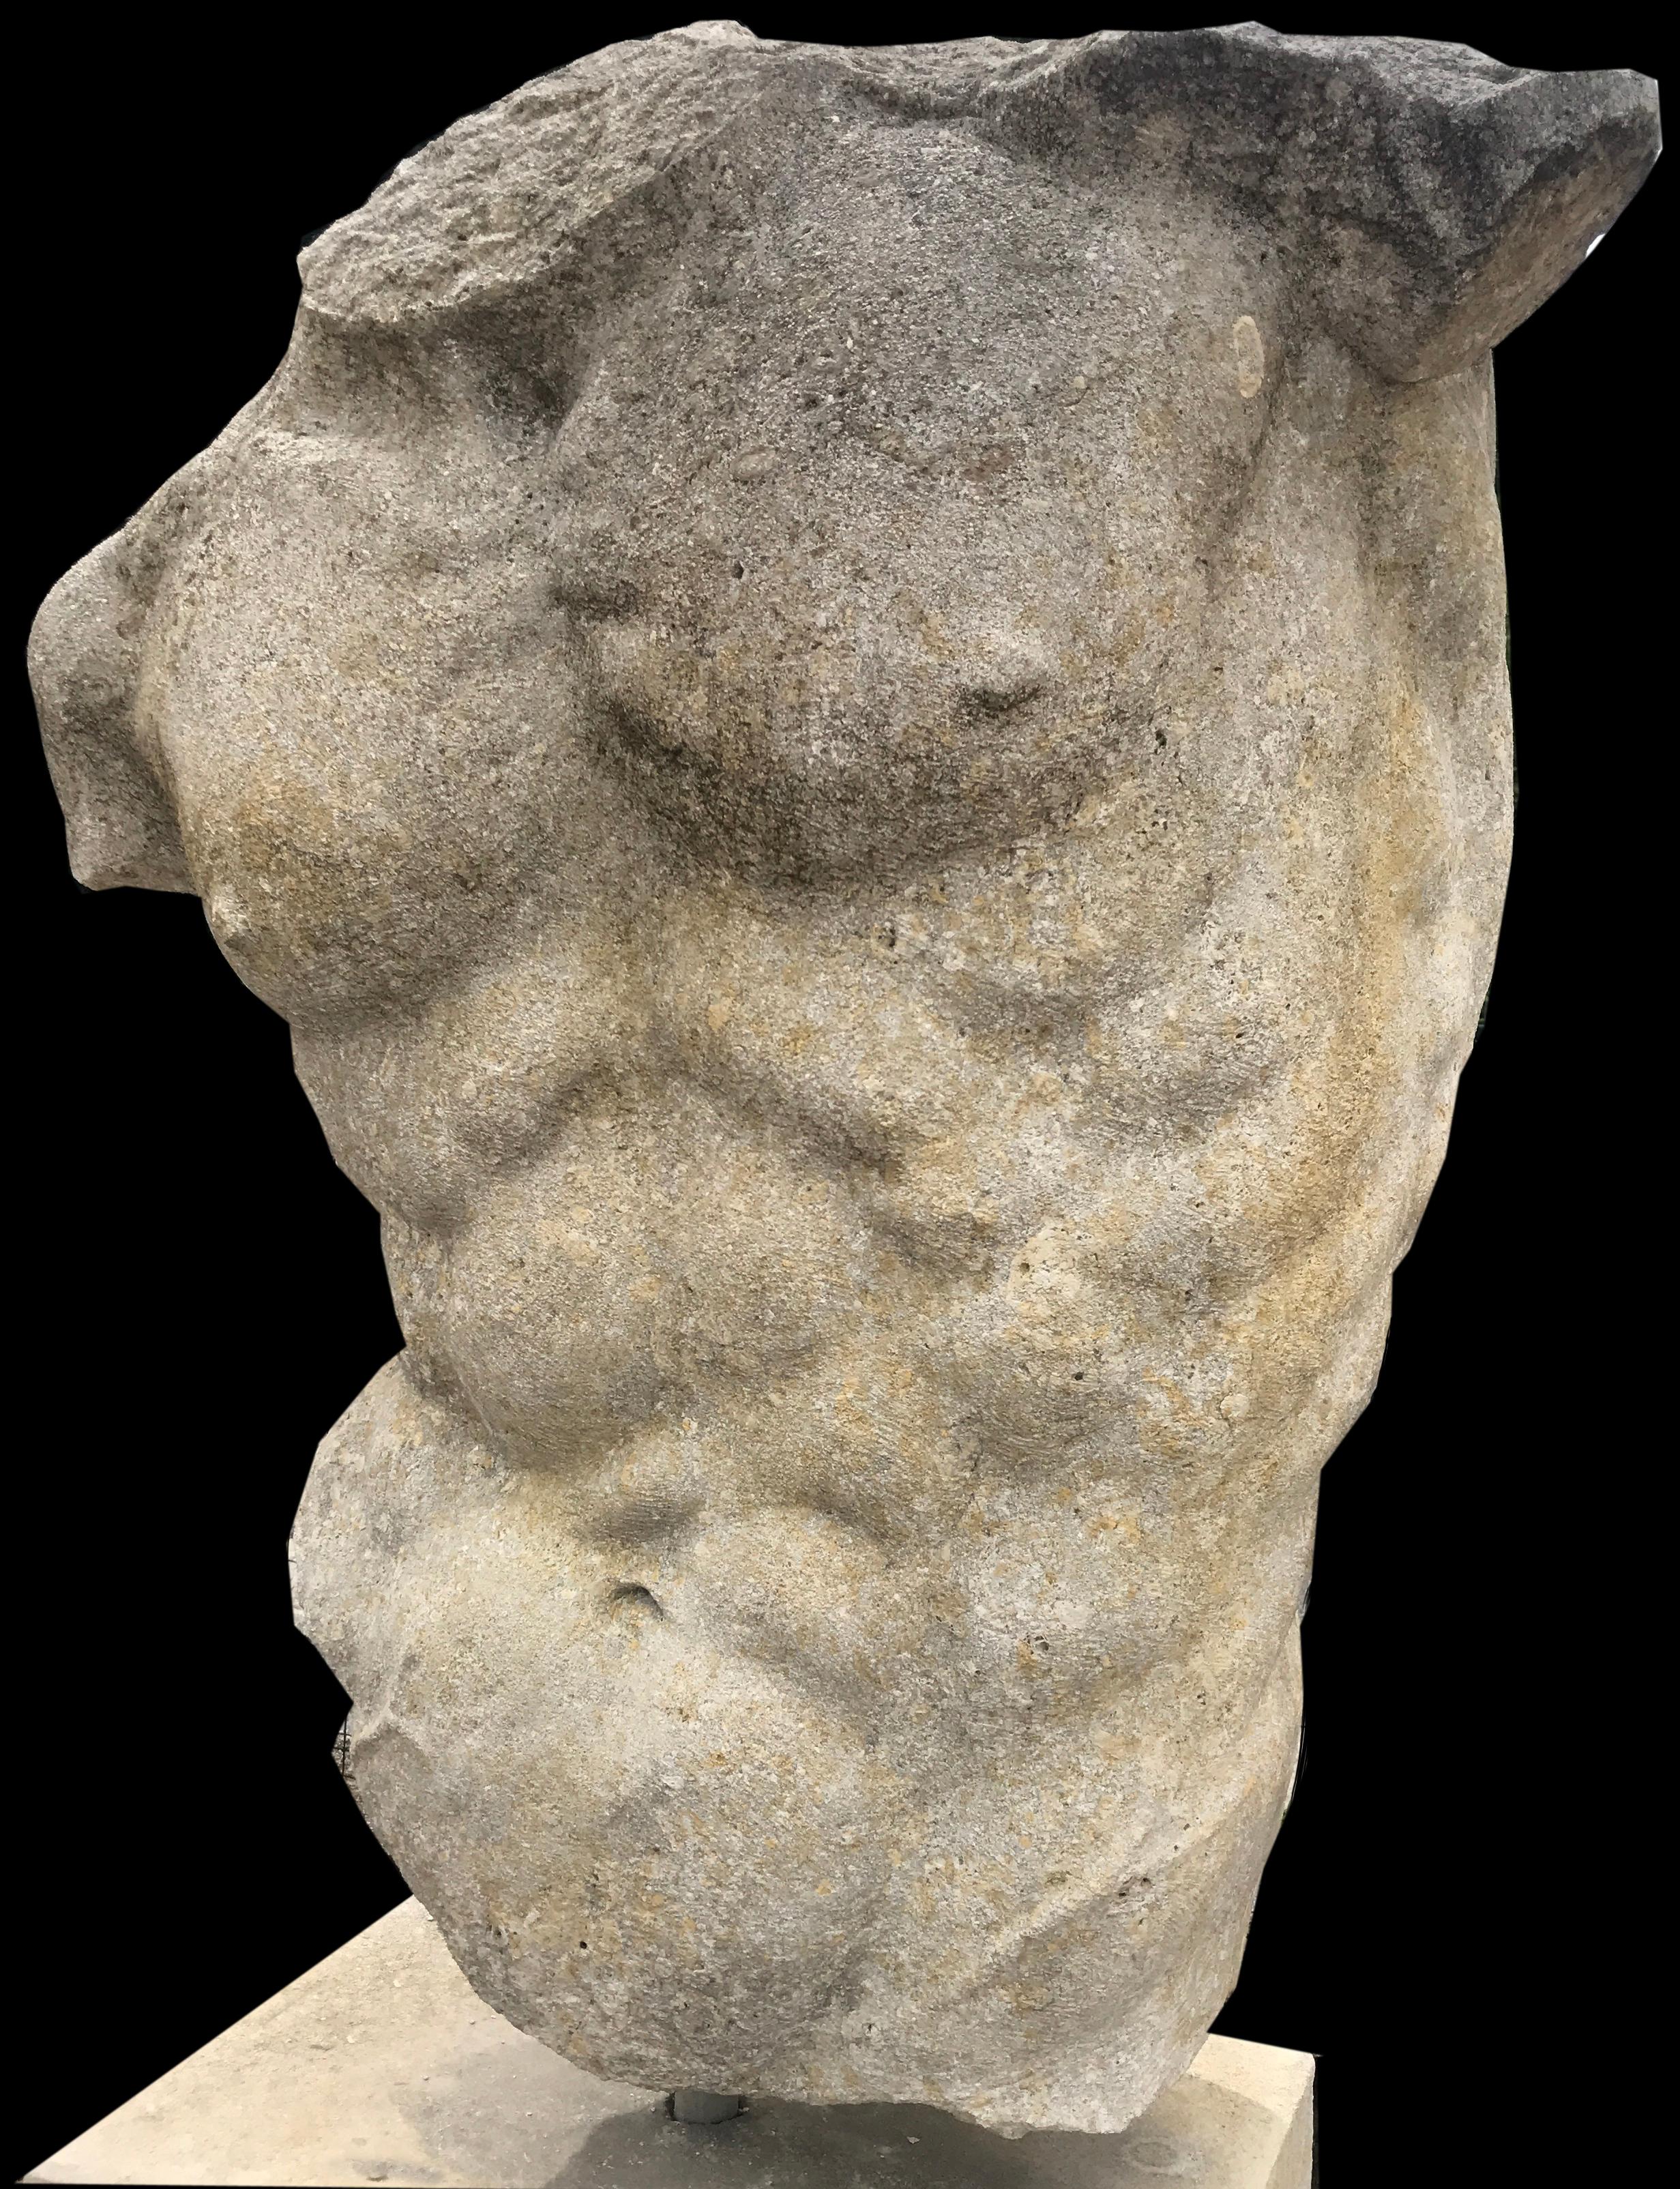 20th Century Italian Stone Sculpture of Classical Torso with Base